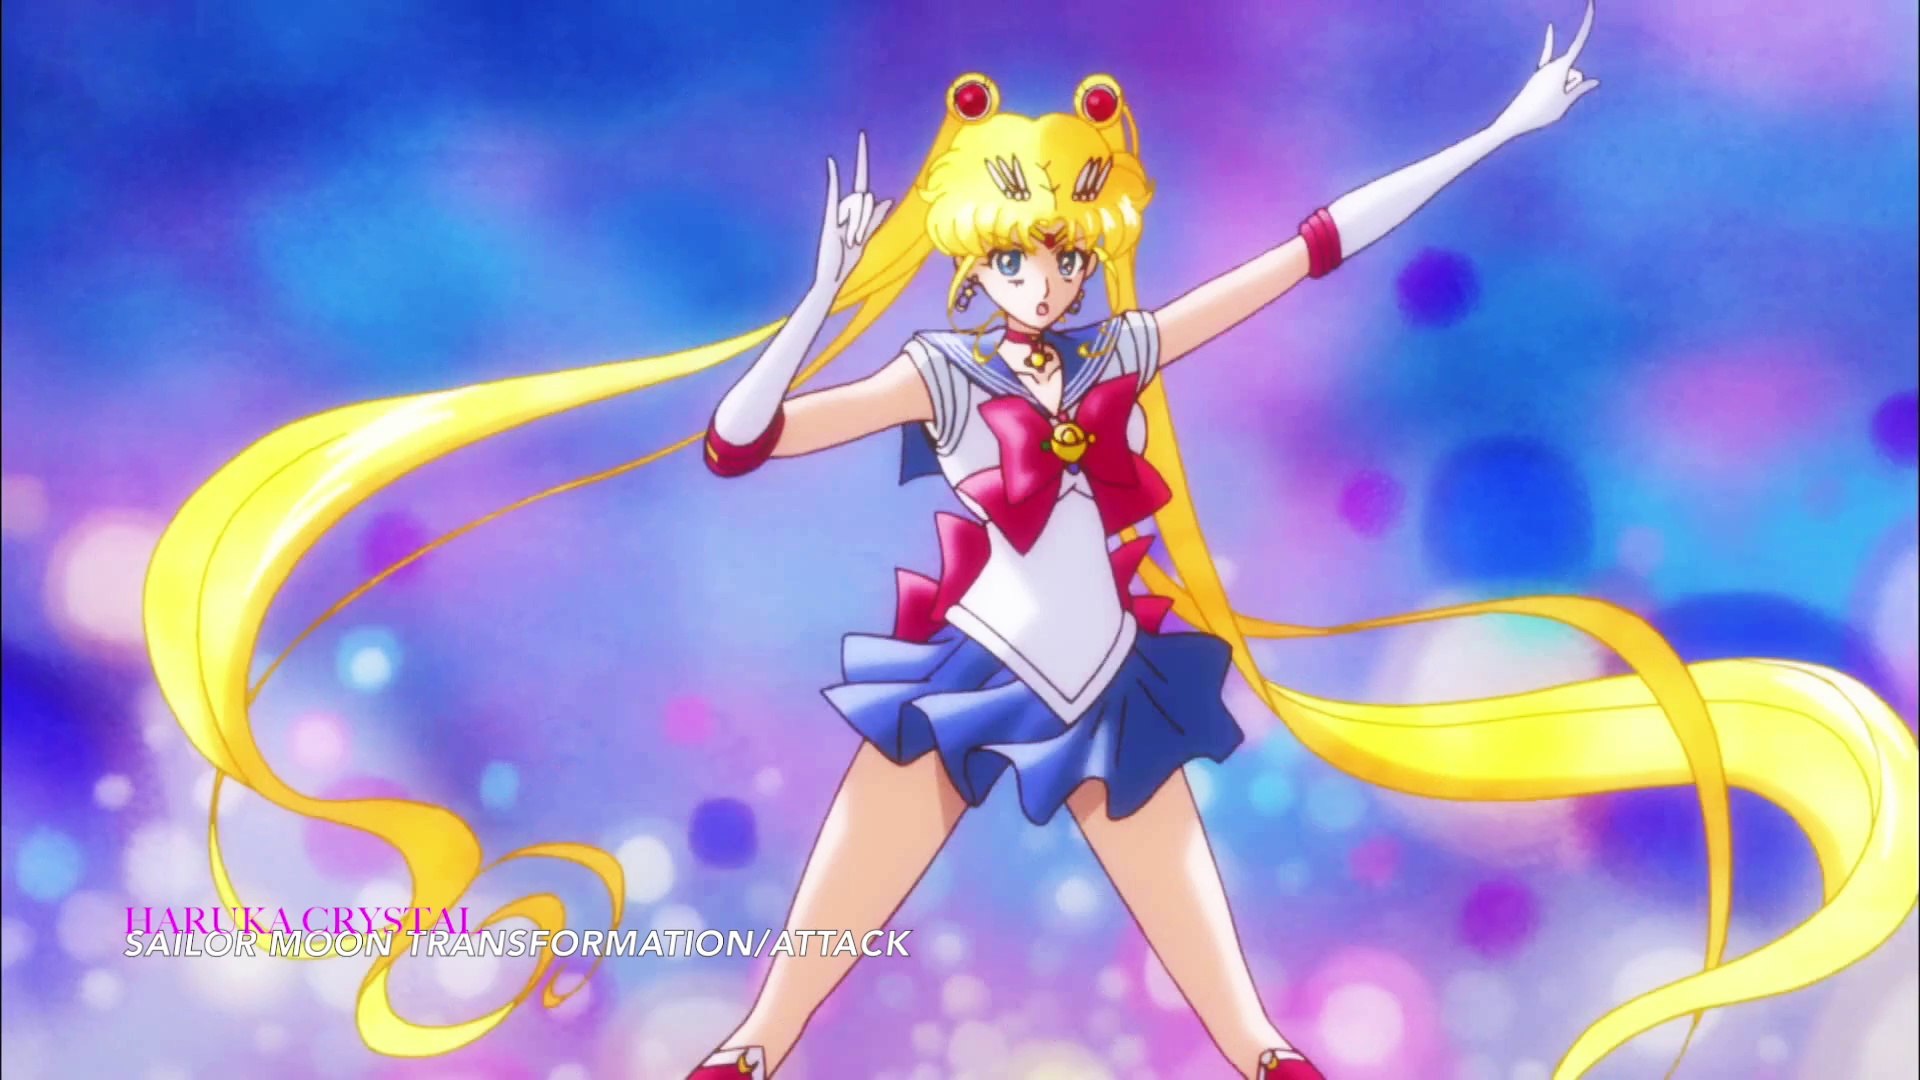 Pretty Guardian Sailor Moon Eternal the Movie - video Dailymotion